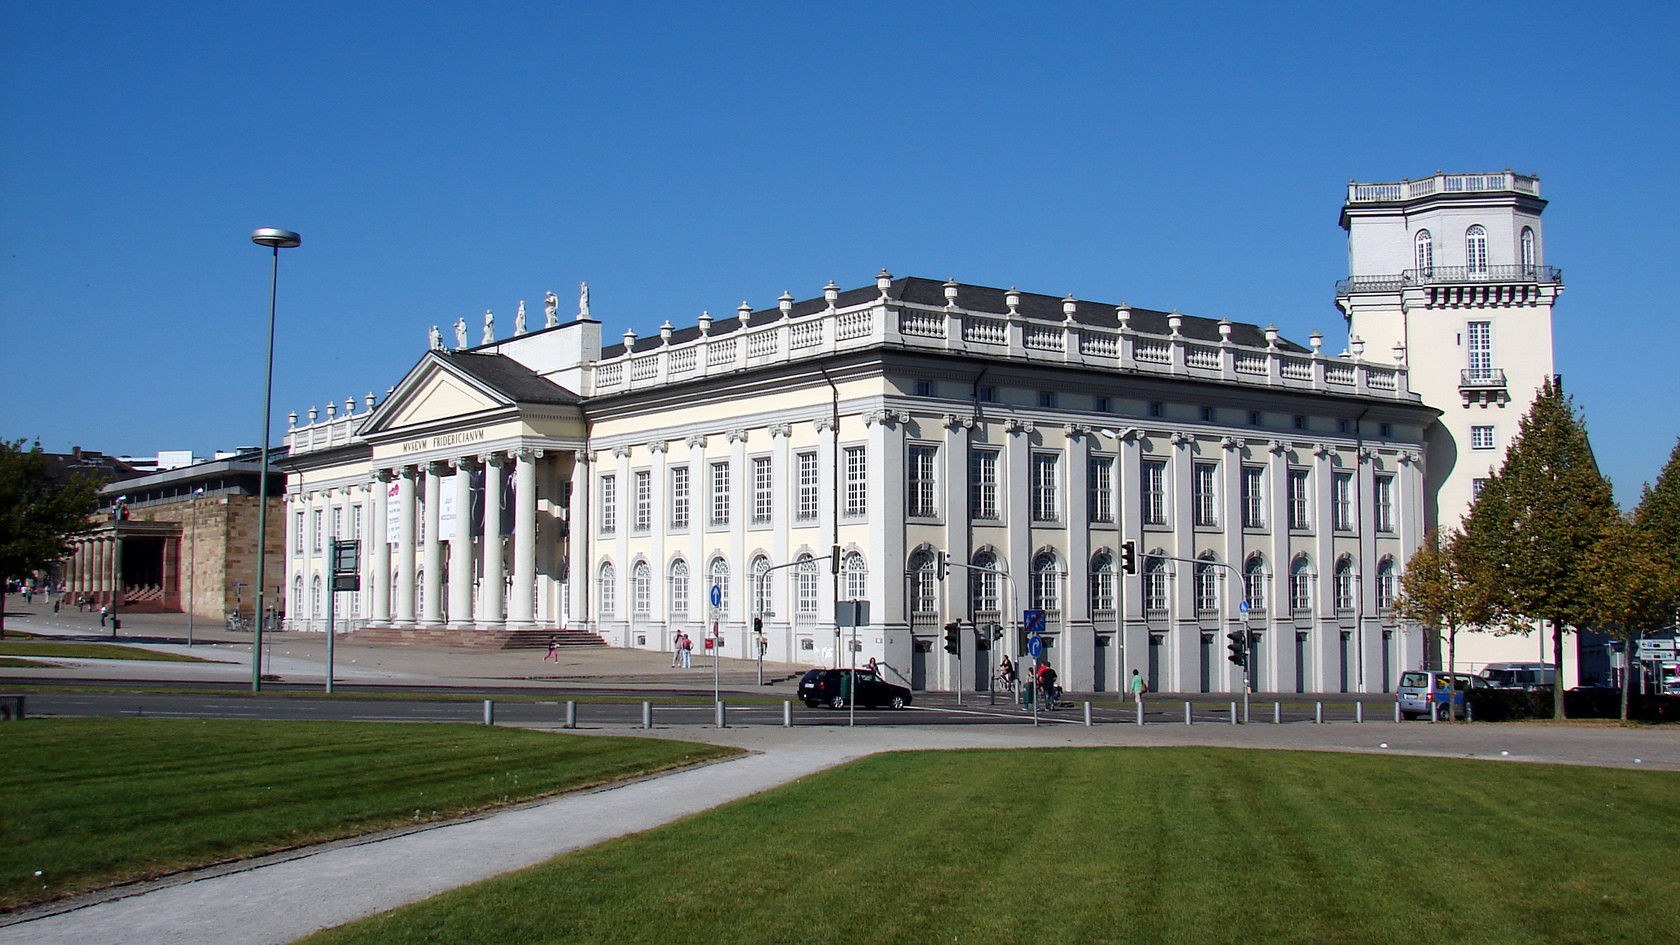 The Fridericianum museum in Kassel, Germany, was built in 1779.